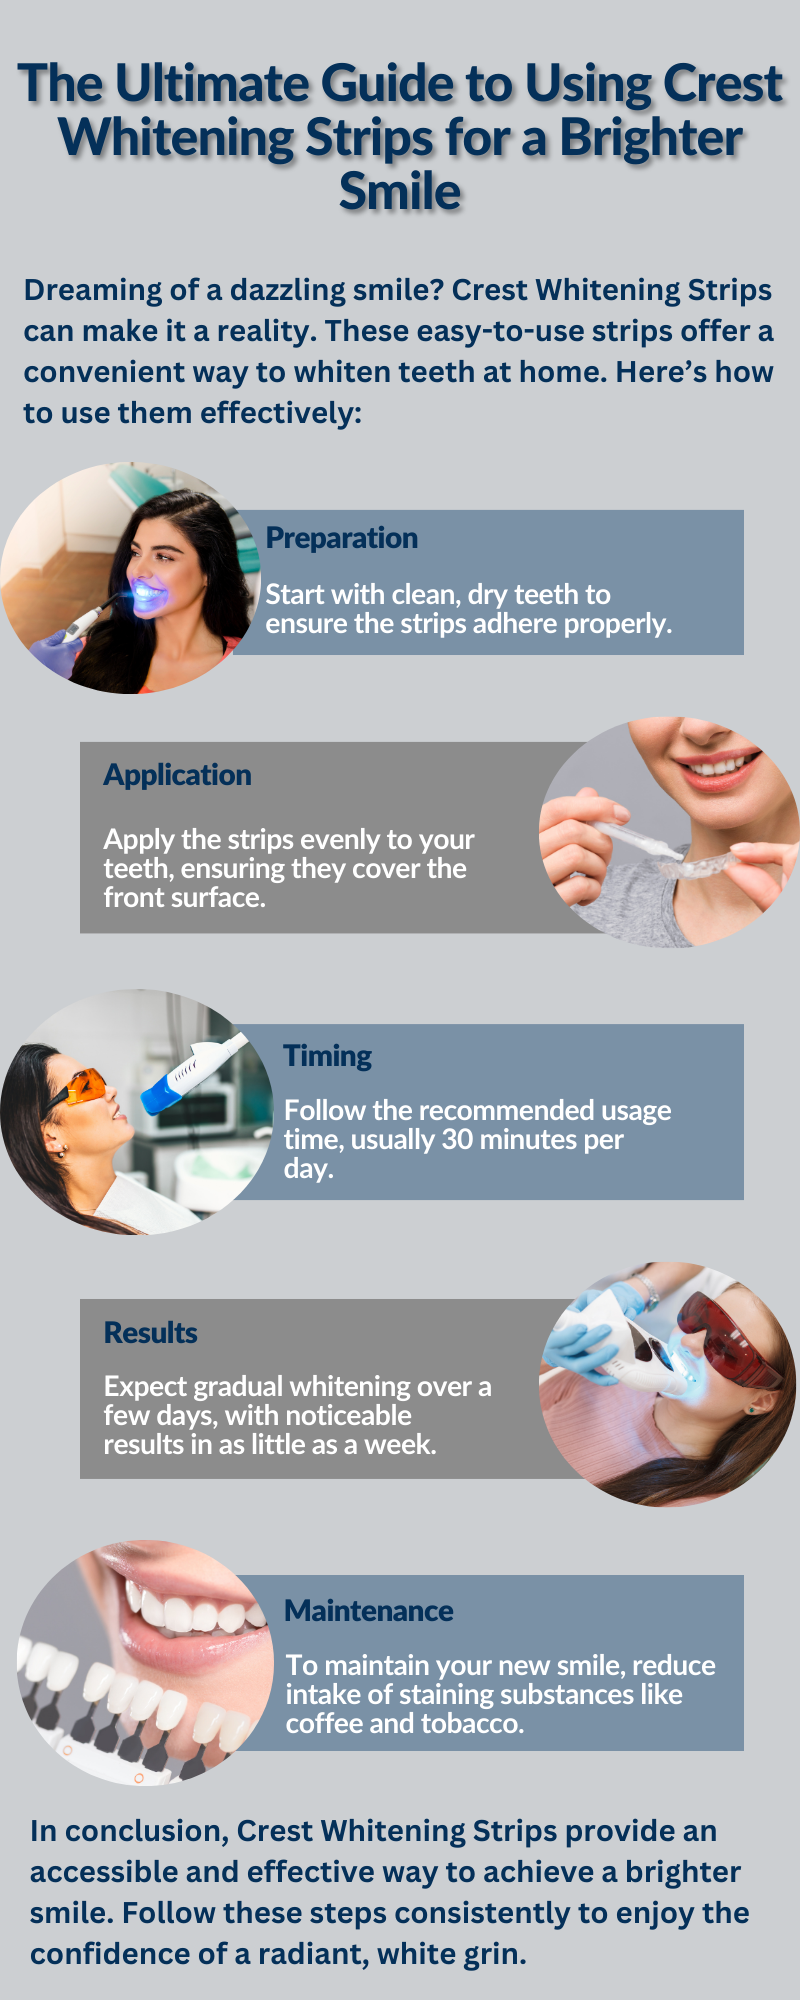 The Ultimate Guide to Using Crest Whitening Strips for a Brighter Smile